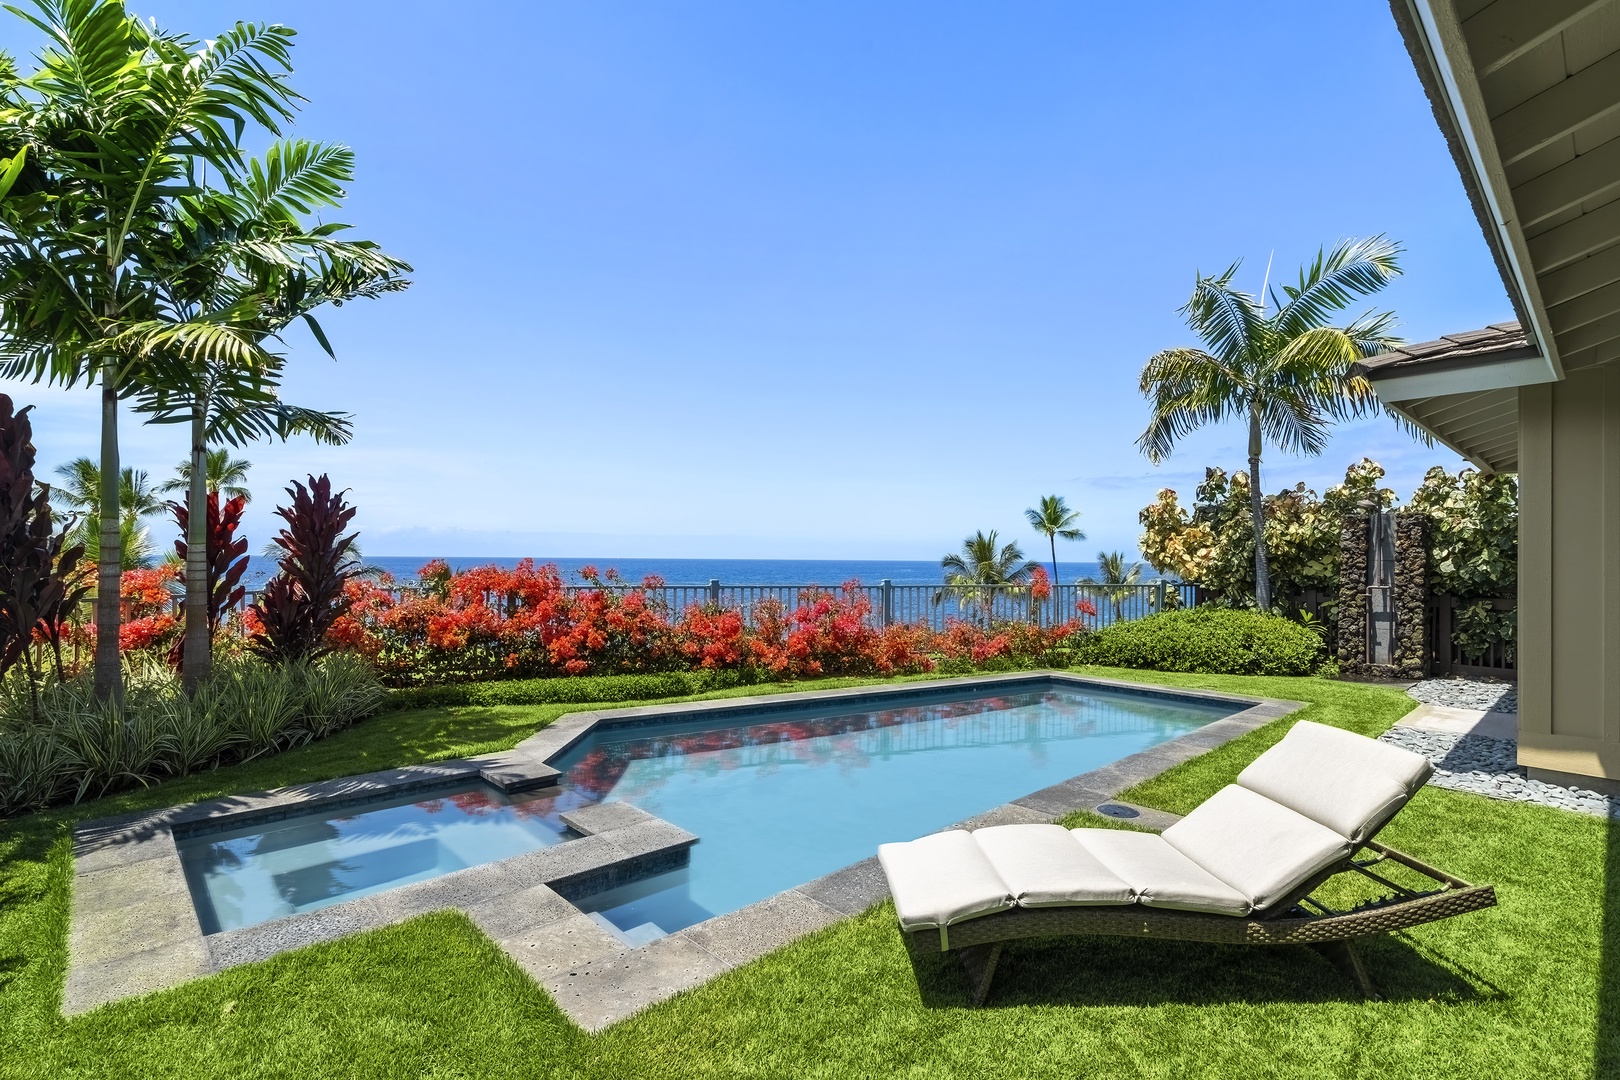 Kailua Kona Vacation Rentals, Blue Orca - Private Ocean view saltwater pool & spa